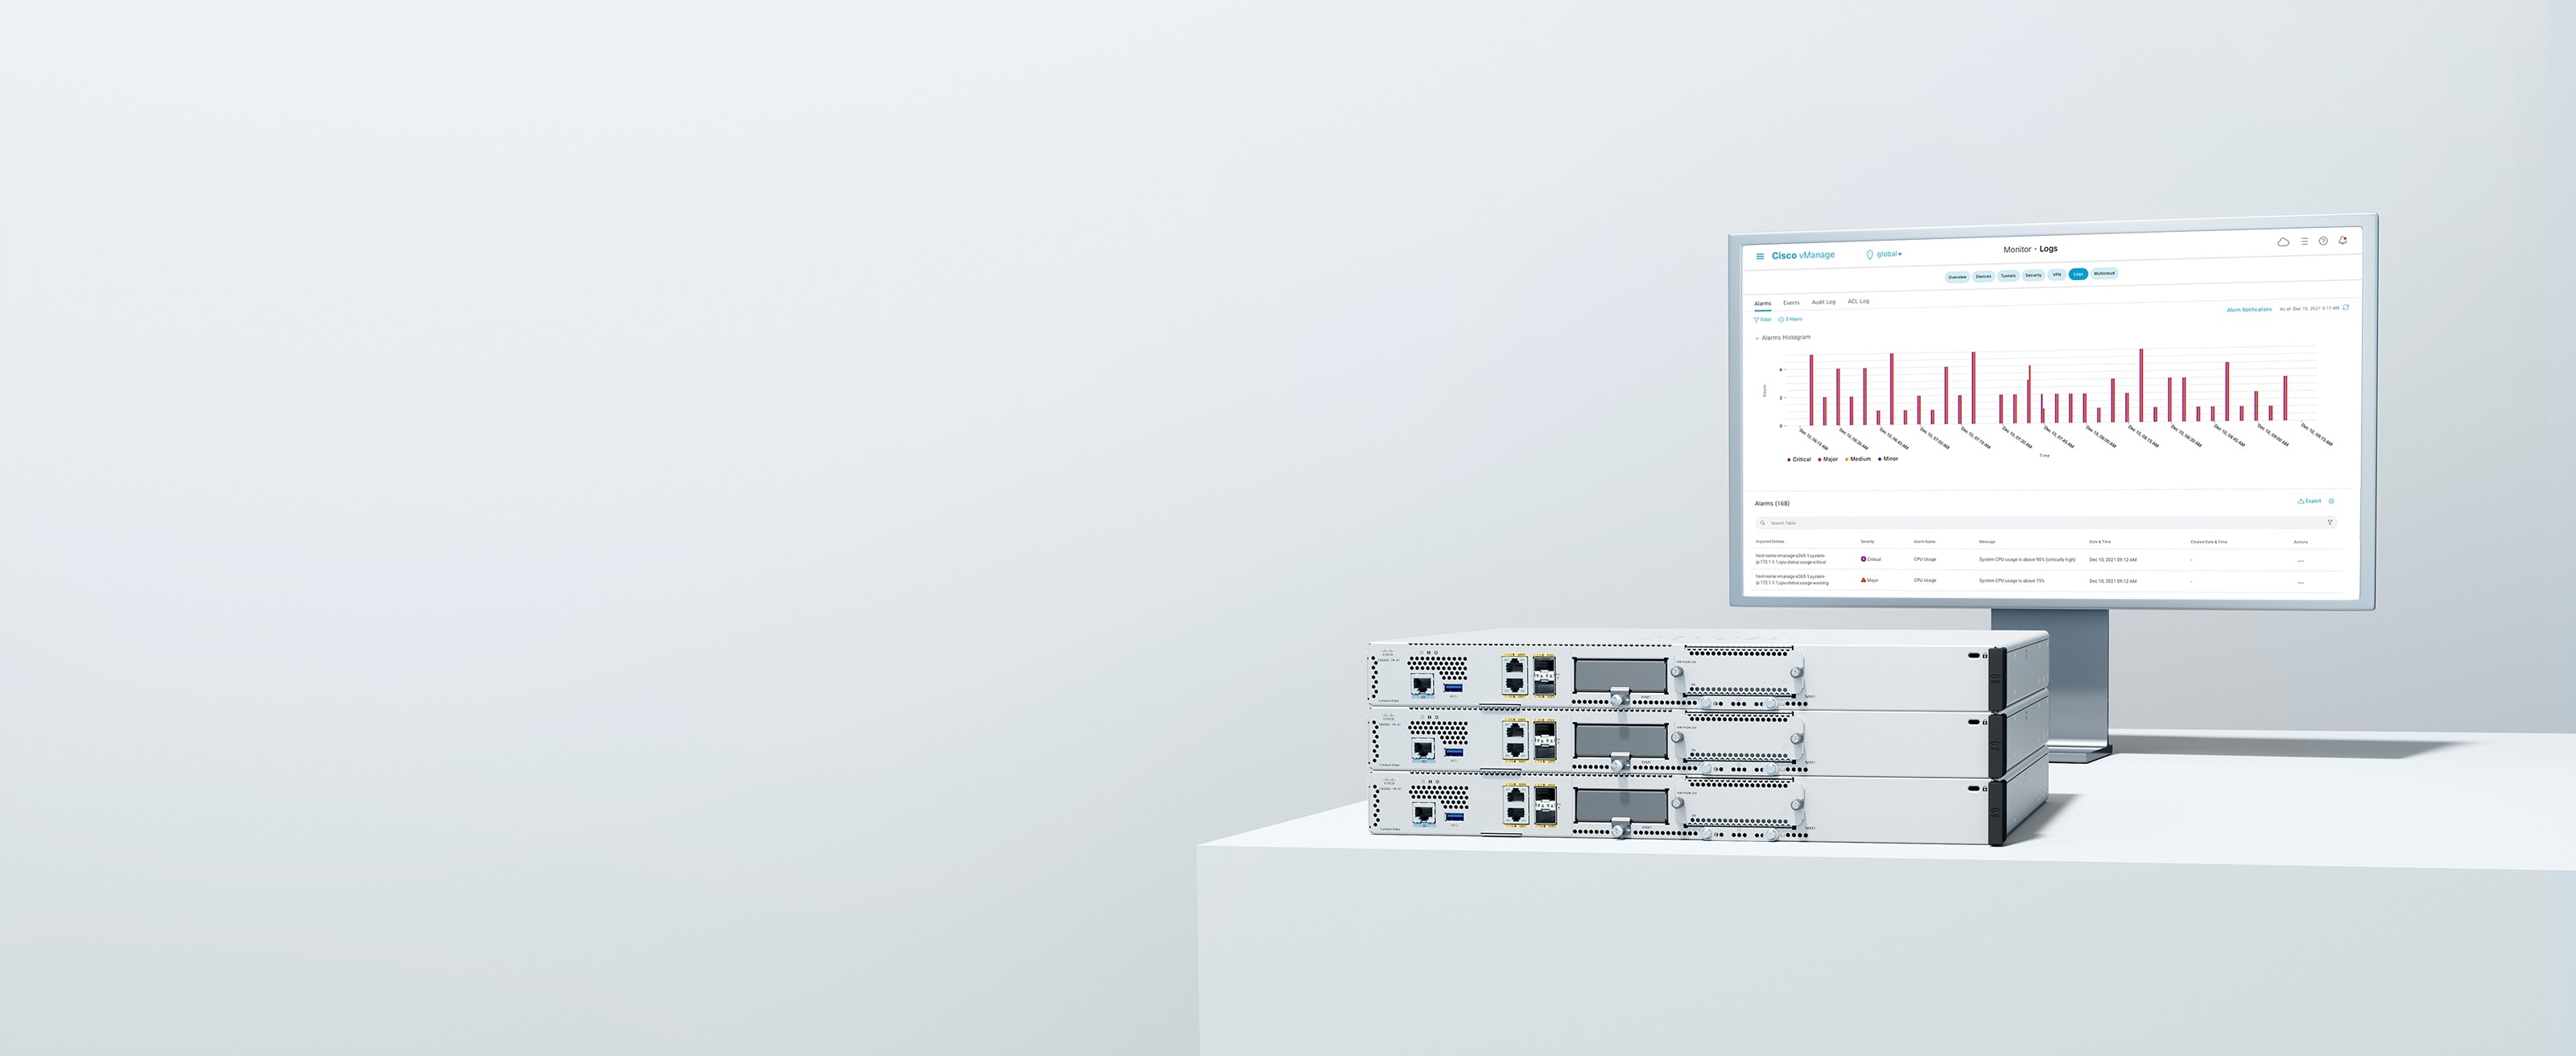 Catalyst 8200 Series Edge Platforms and Catalyst SD-WAN Manager user interface